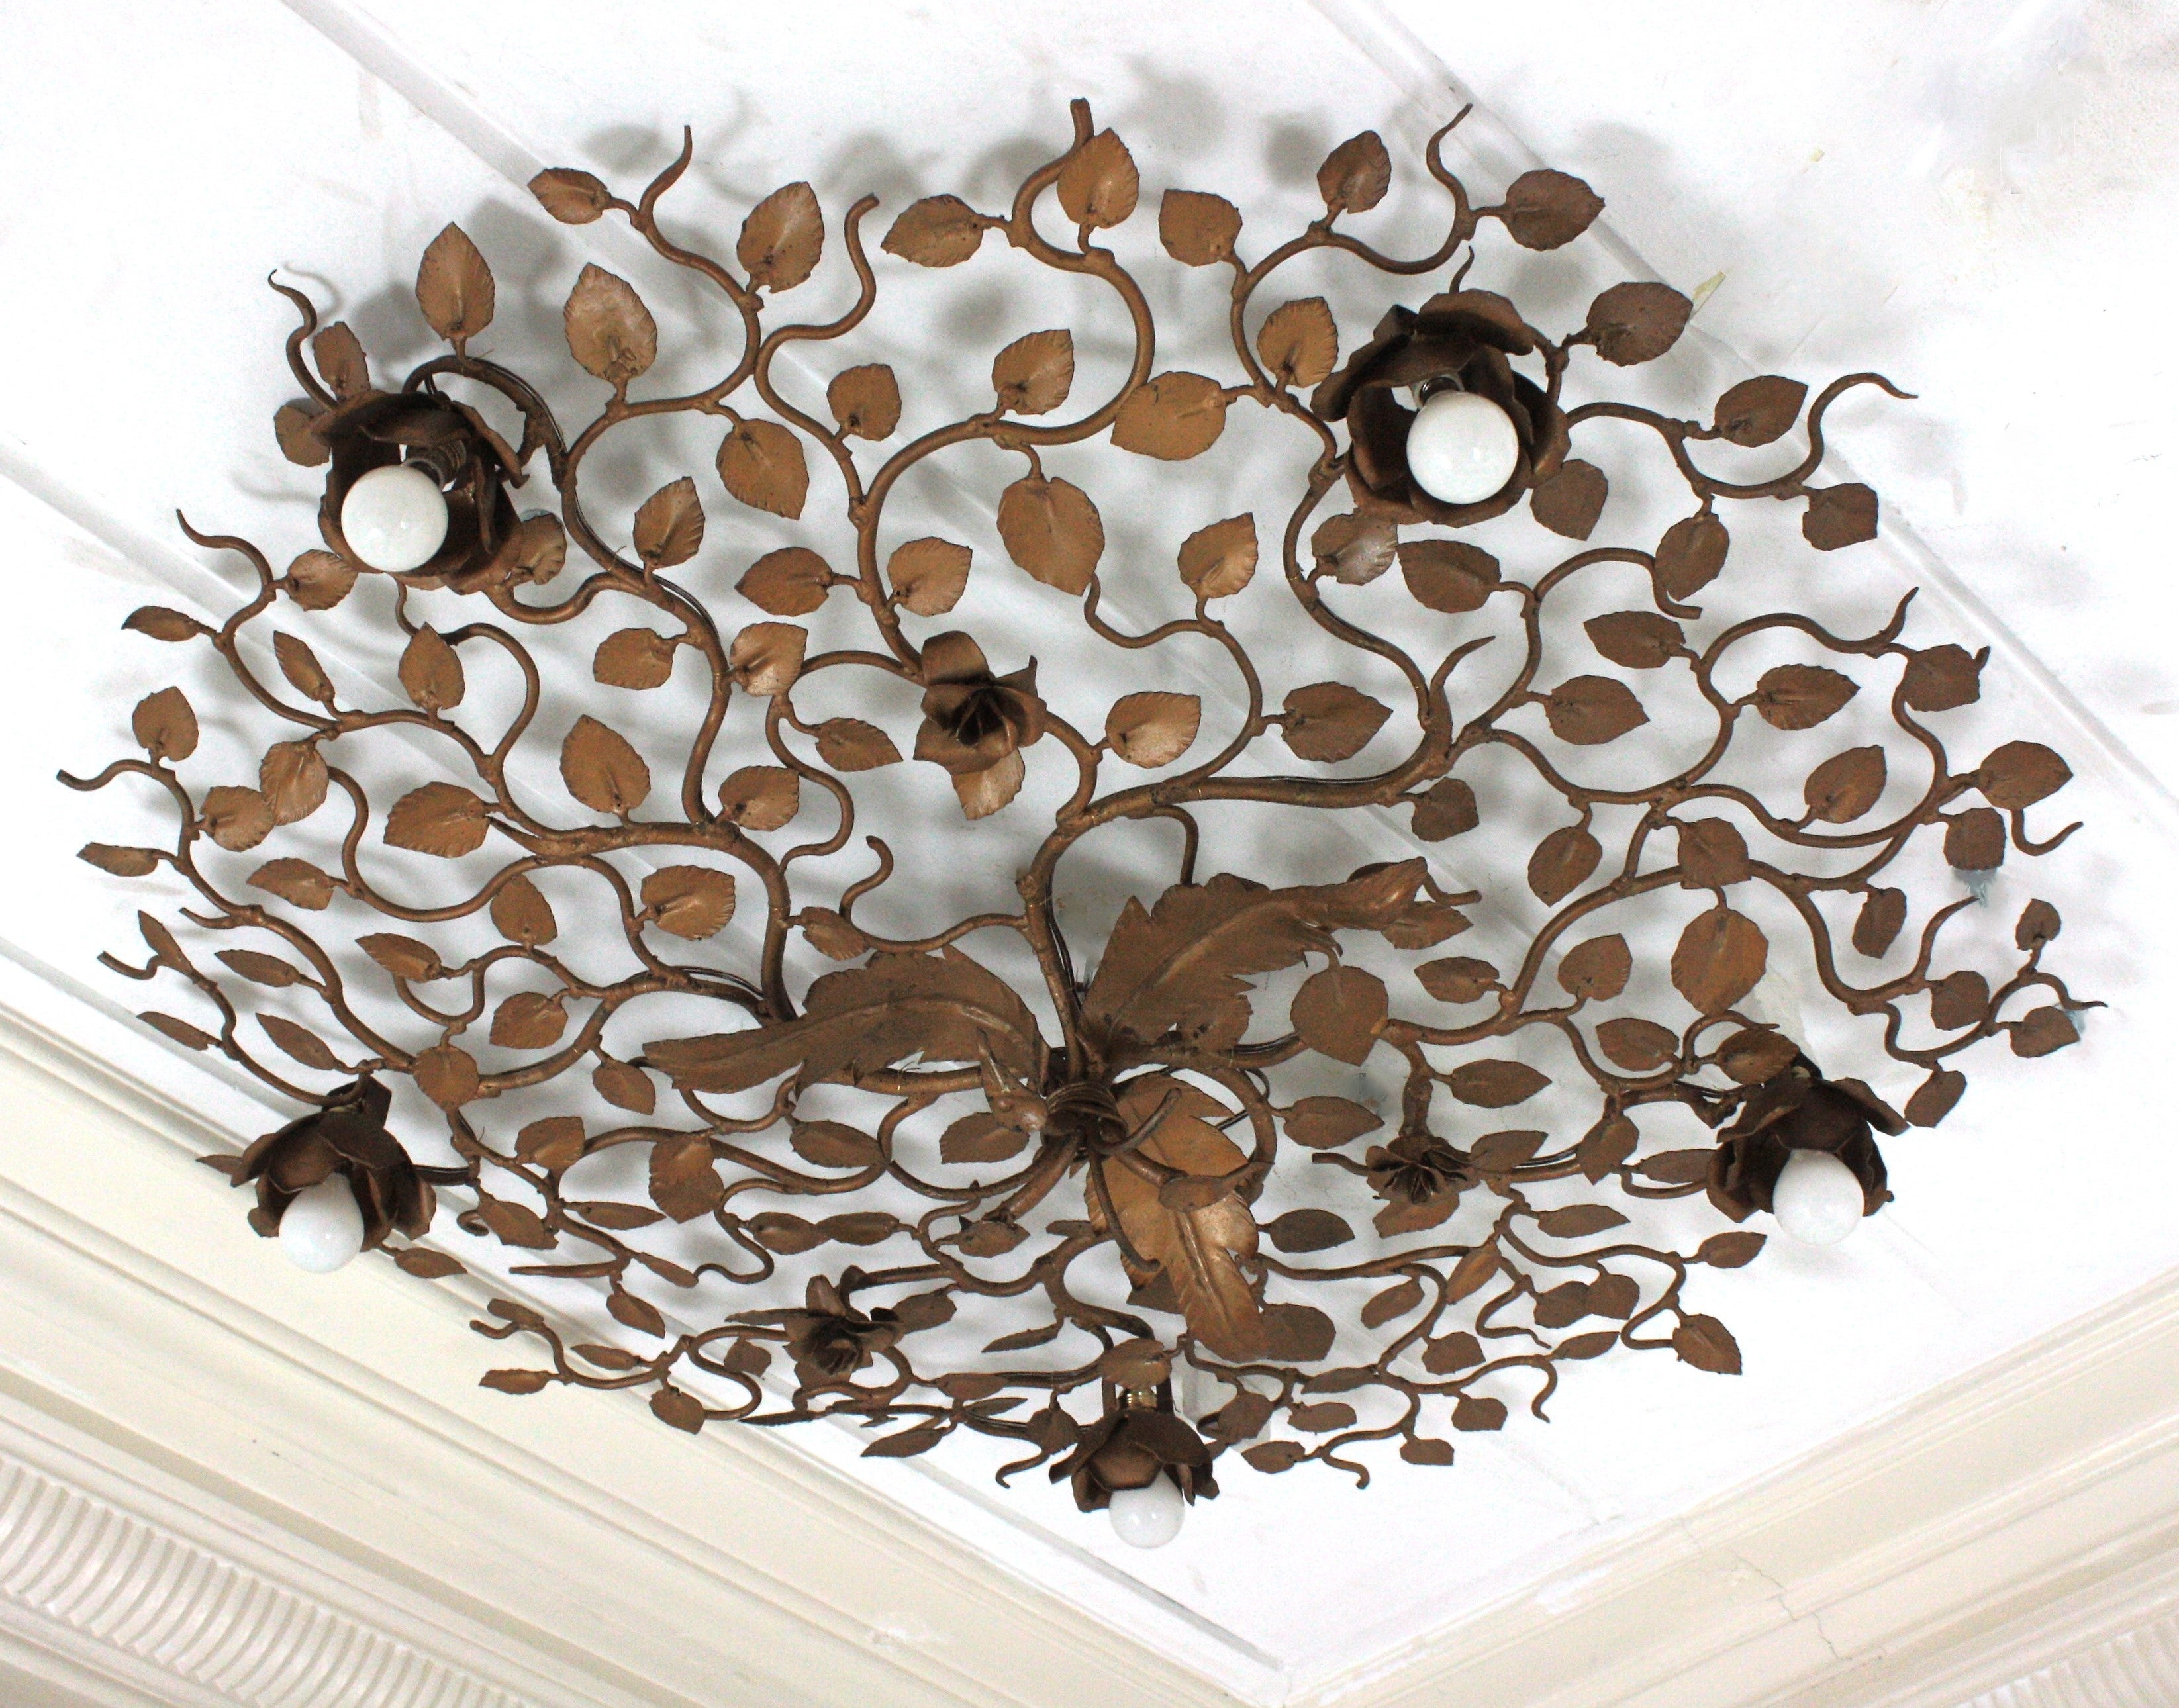 Rosebush tree ornate ceiling flush mount, hand forged gilt iron, Spain, 1950s-1960s. 
Monumental large size ( 42,12) hand-hammered gilt iron foliage flower bush ceiling light fixture with six flower lights.
This ceiling light fixture was entirely